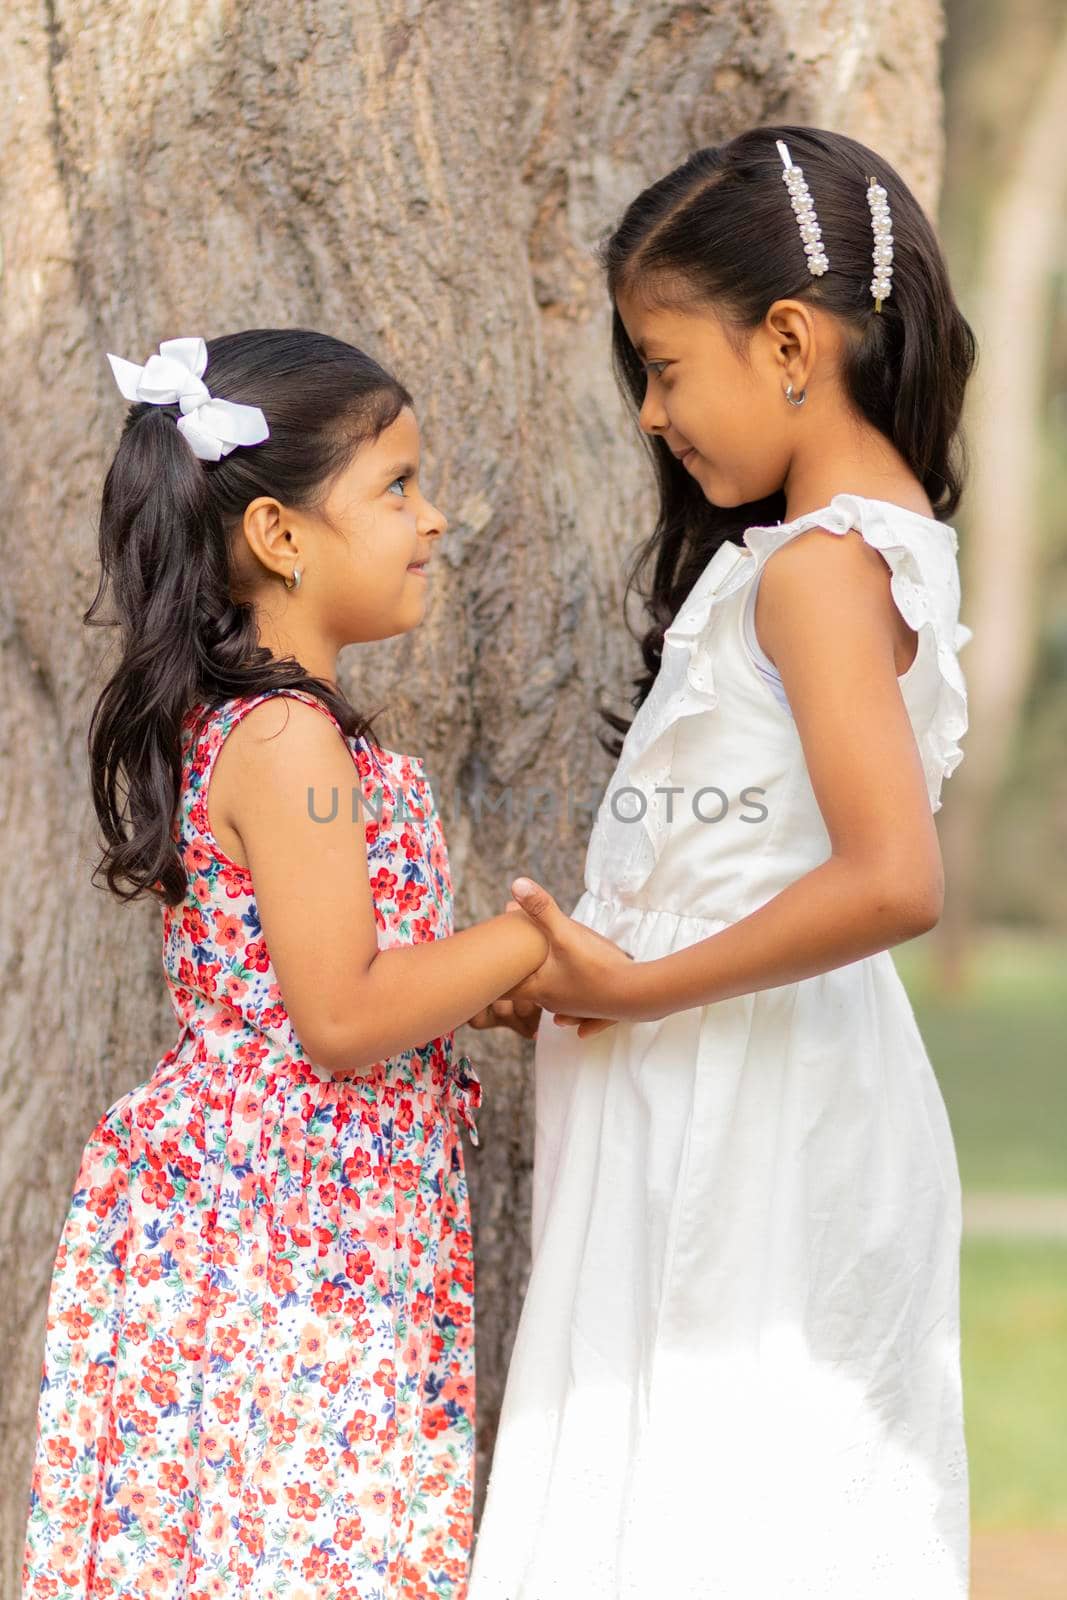 Tender little sisters hugging each other and showing their true love